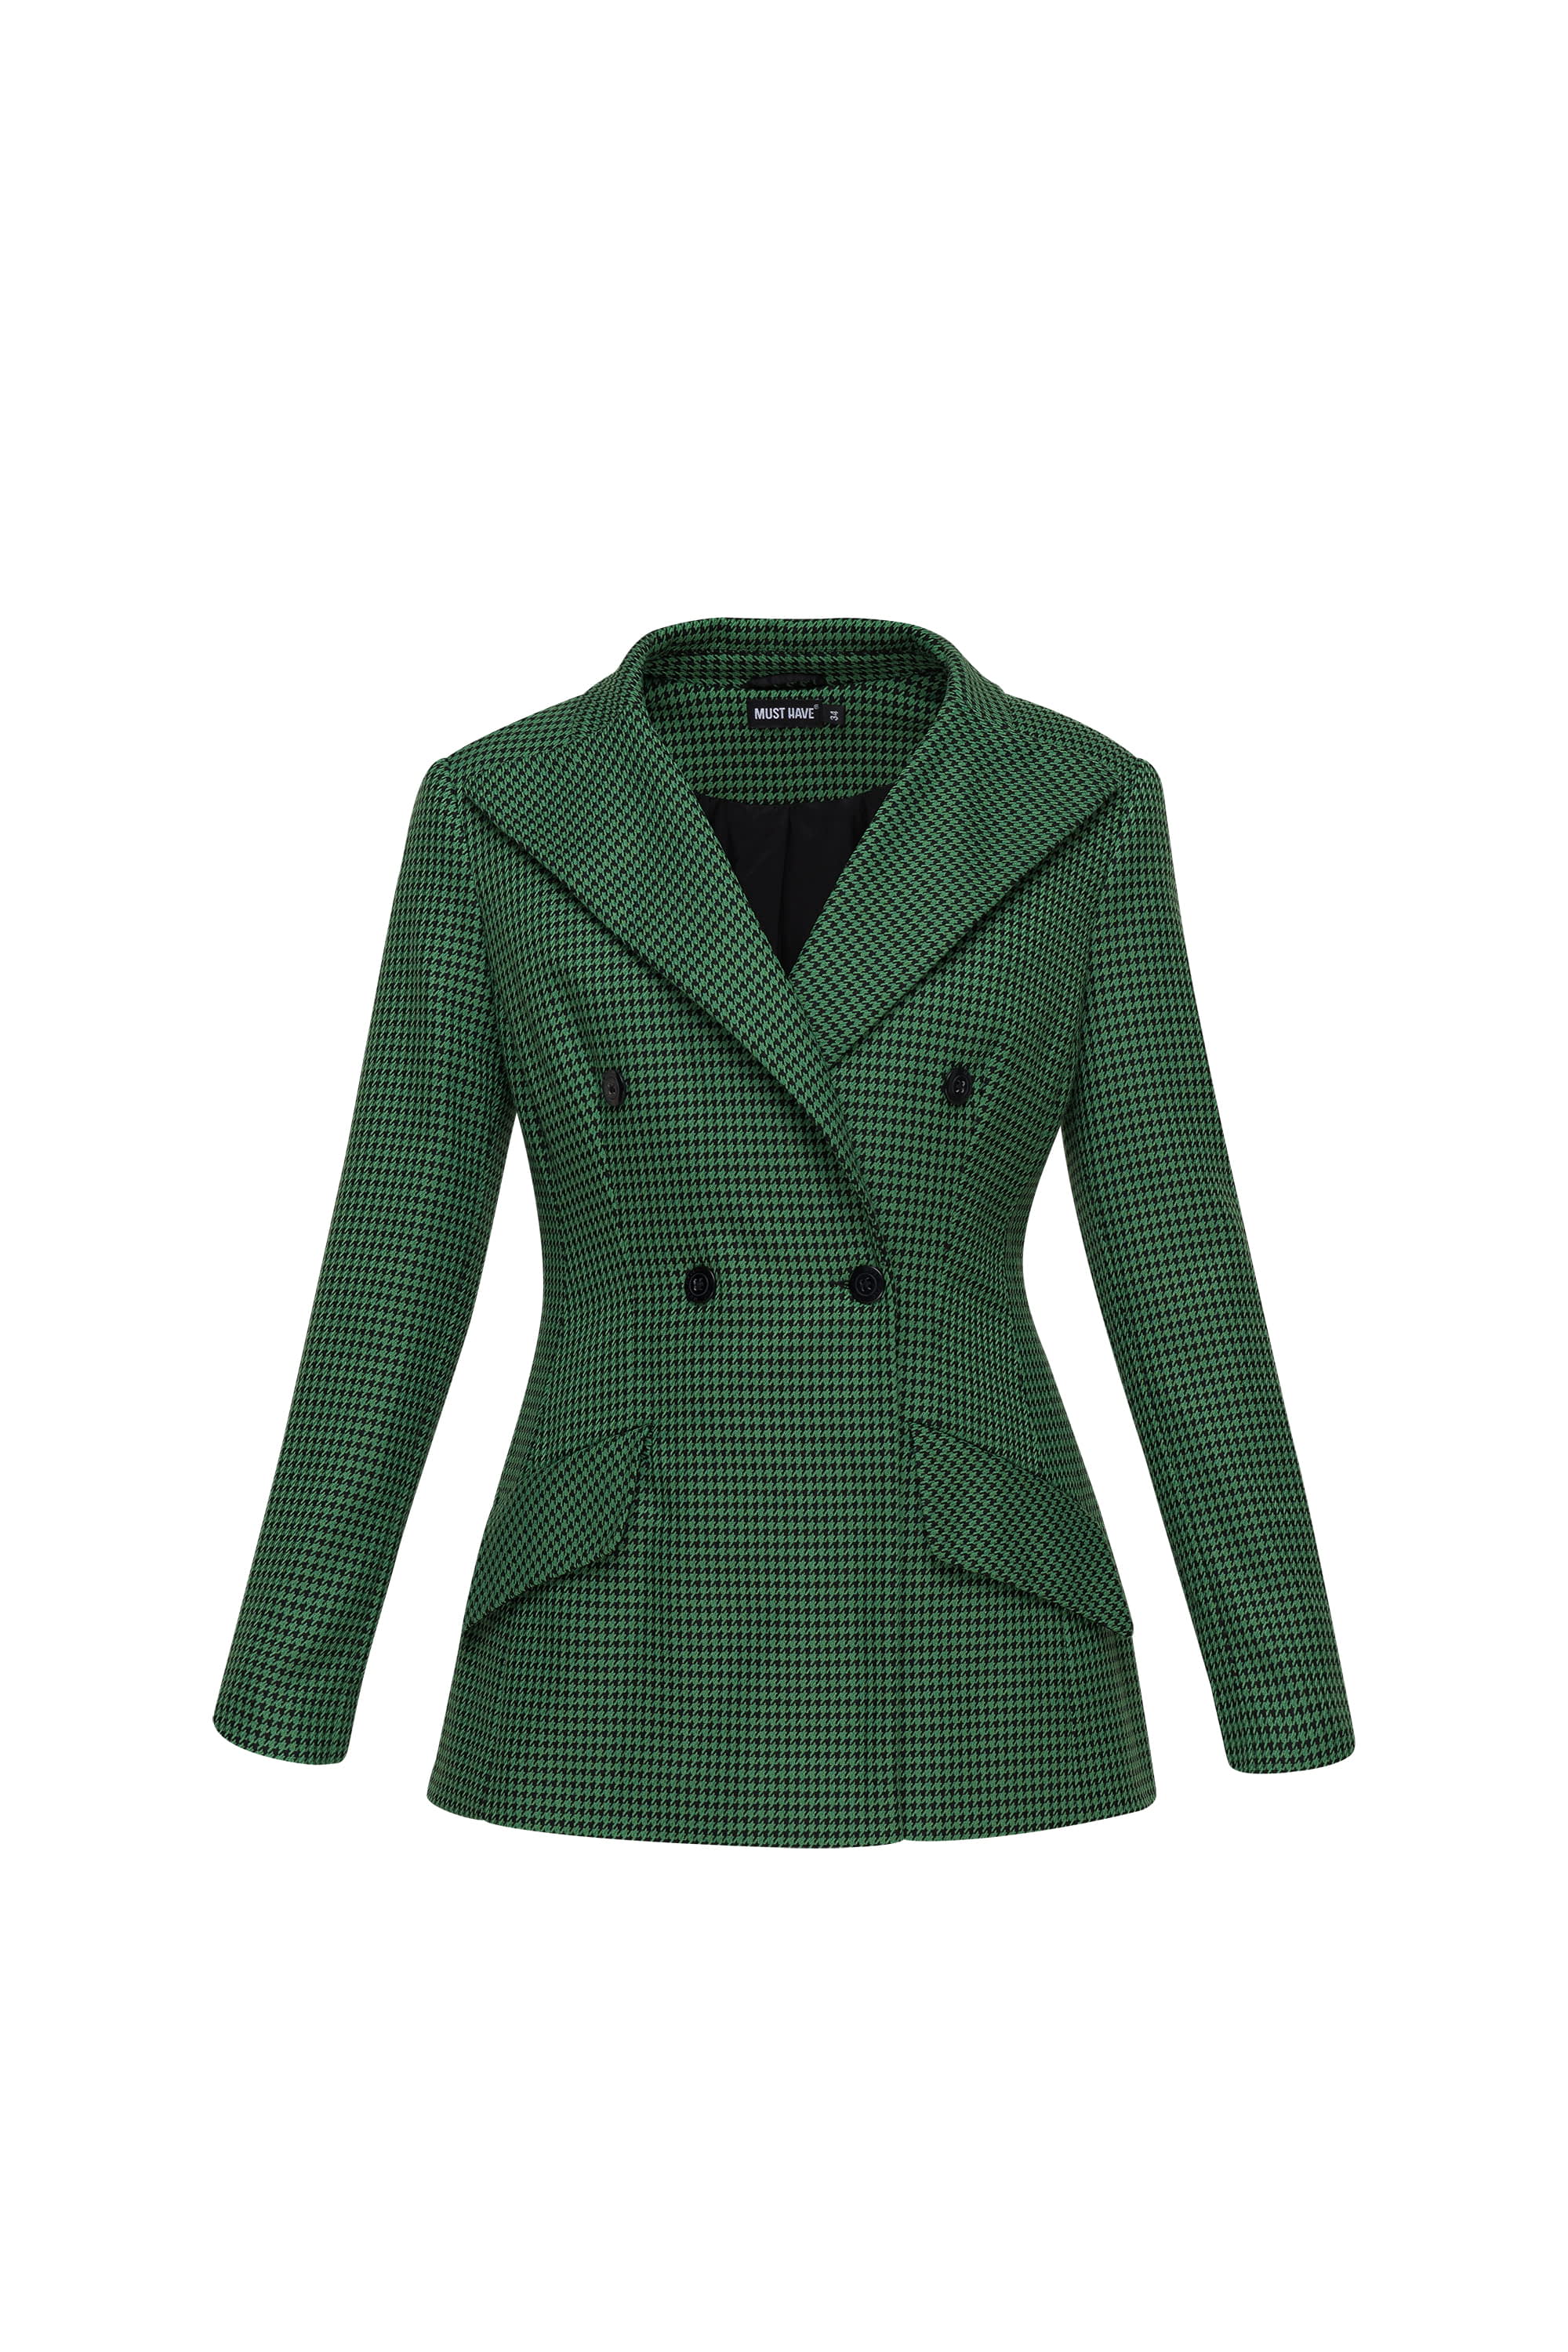 Double-breasted green jacket with a houndstooth print and pockets, photo 8